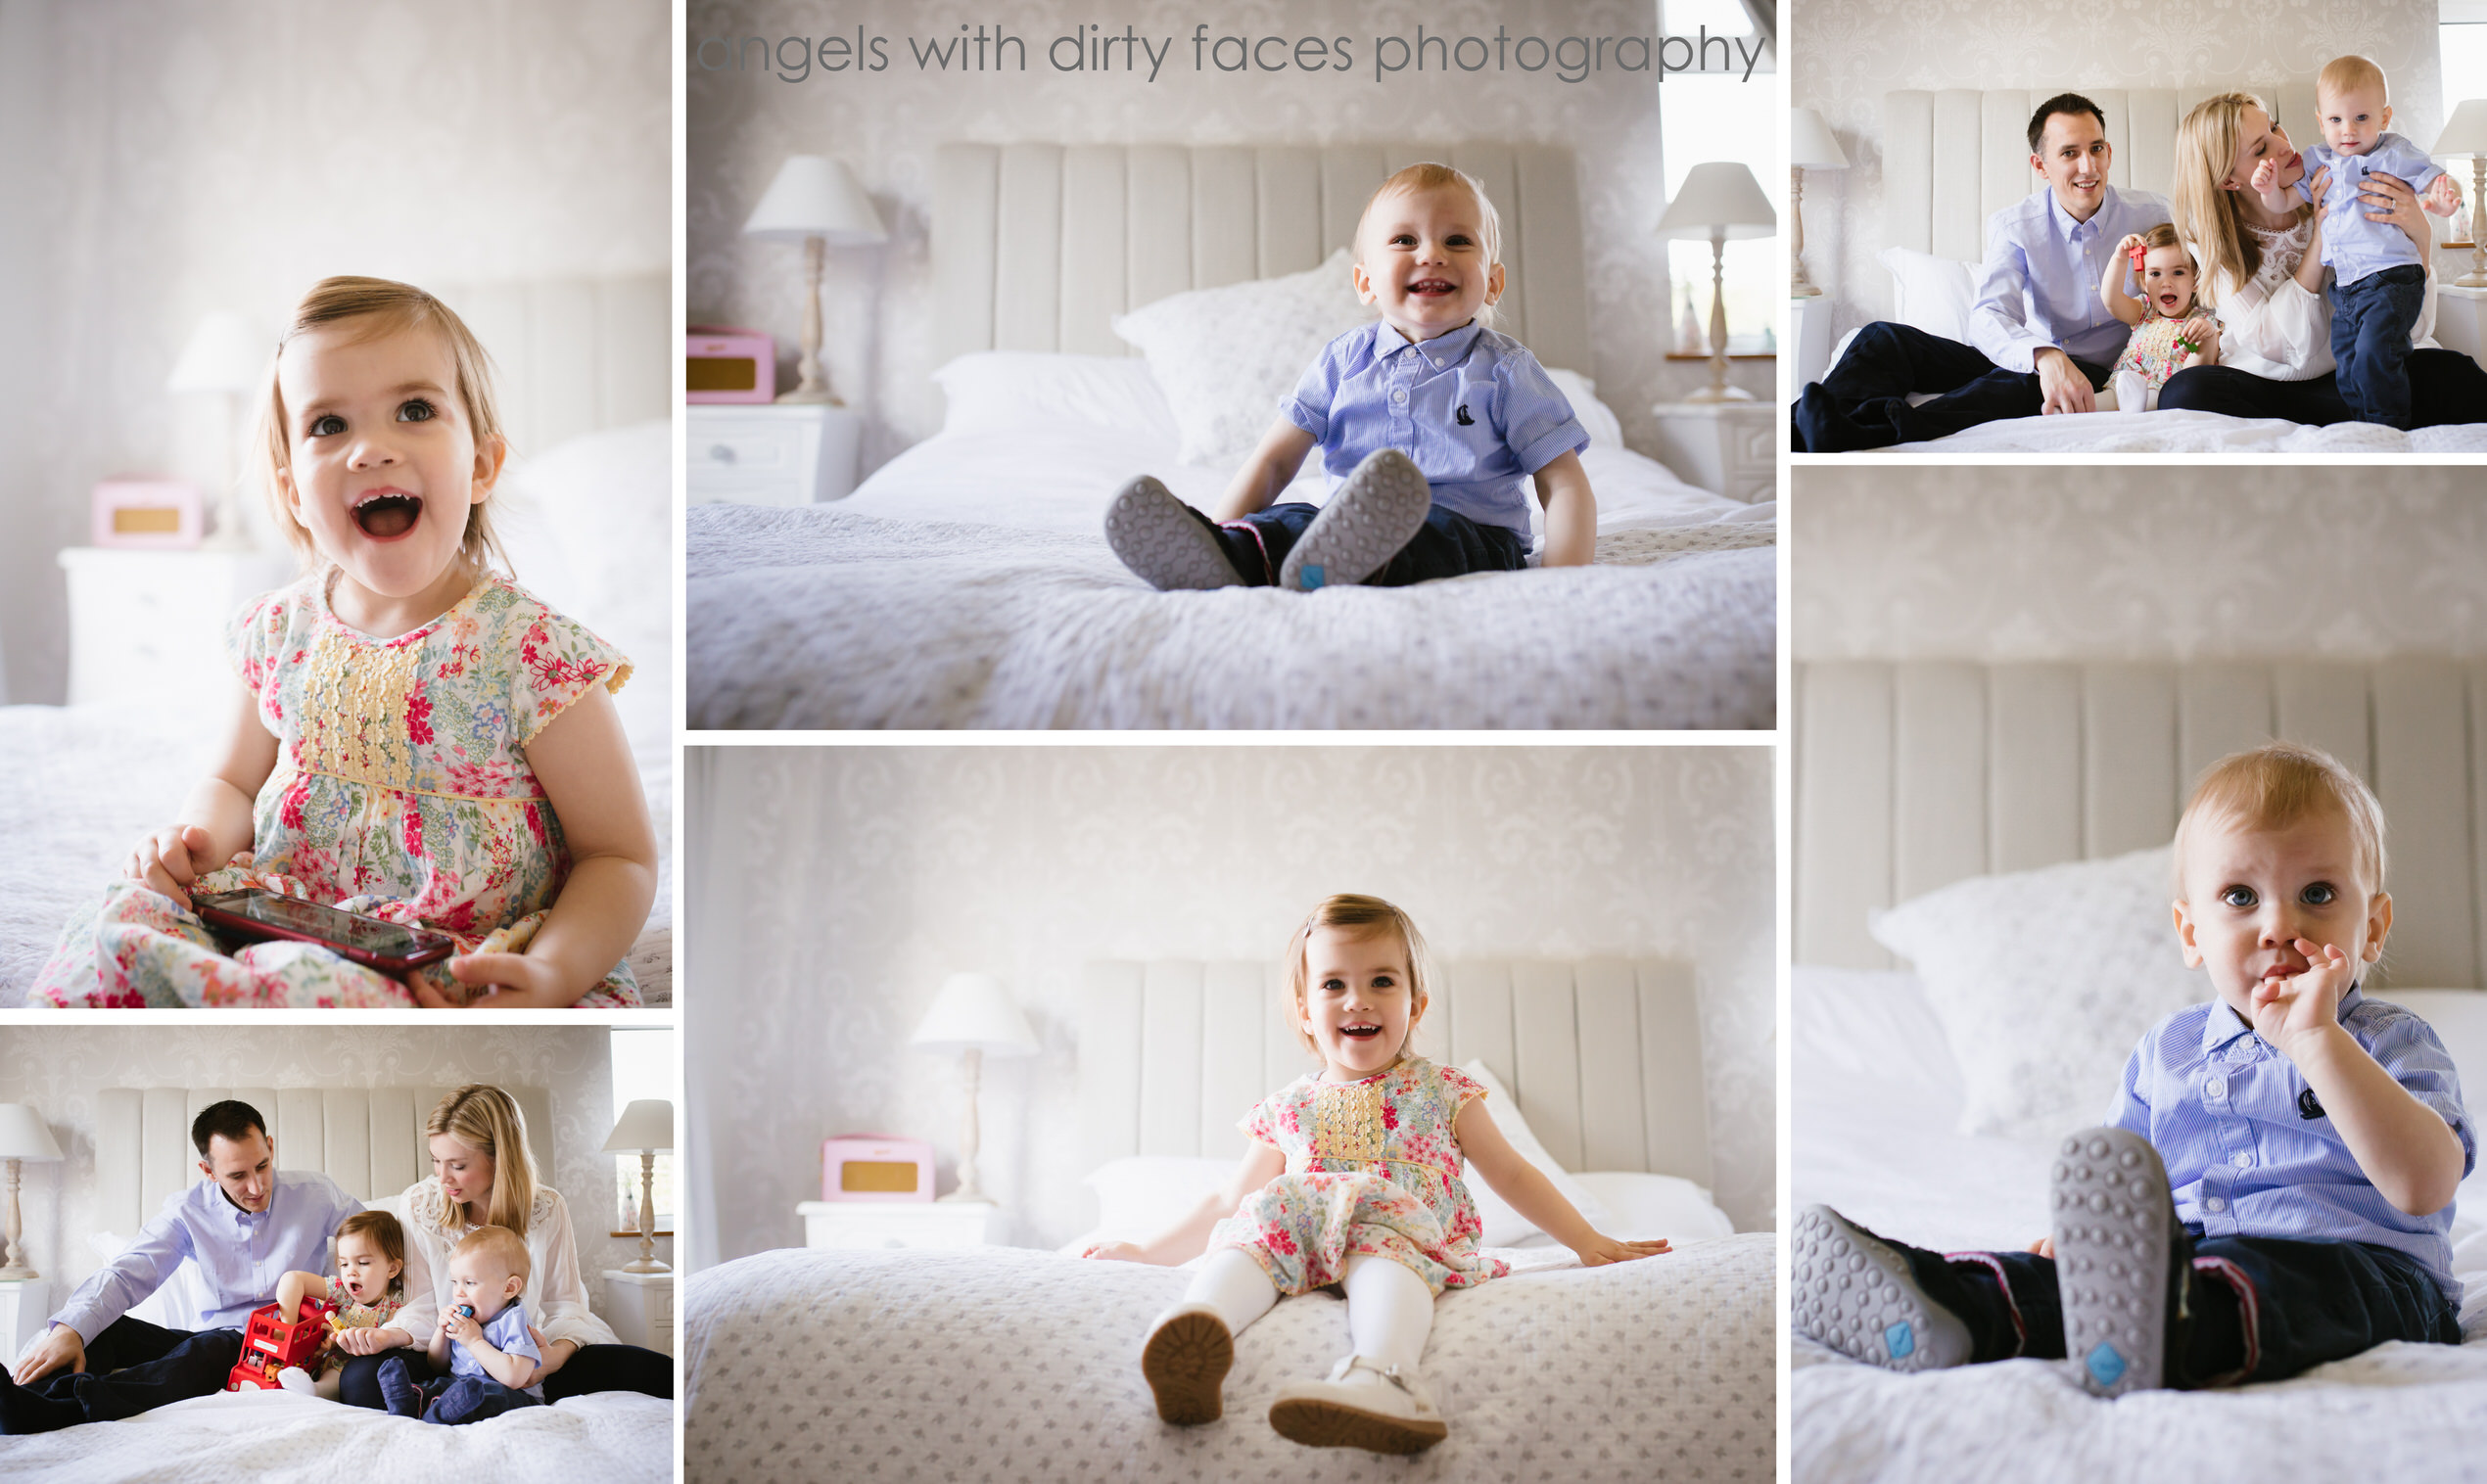 hertfordshire child photographer collage of photo shoot at home